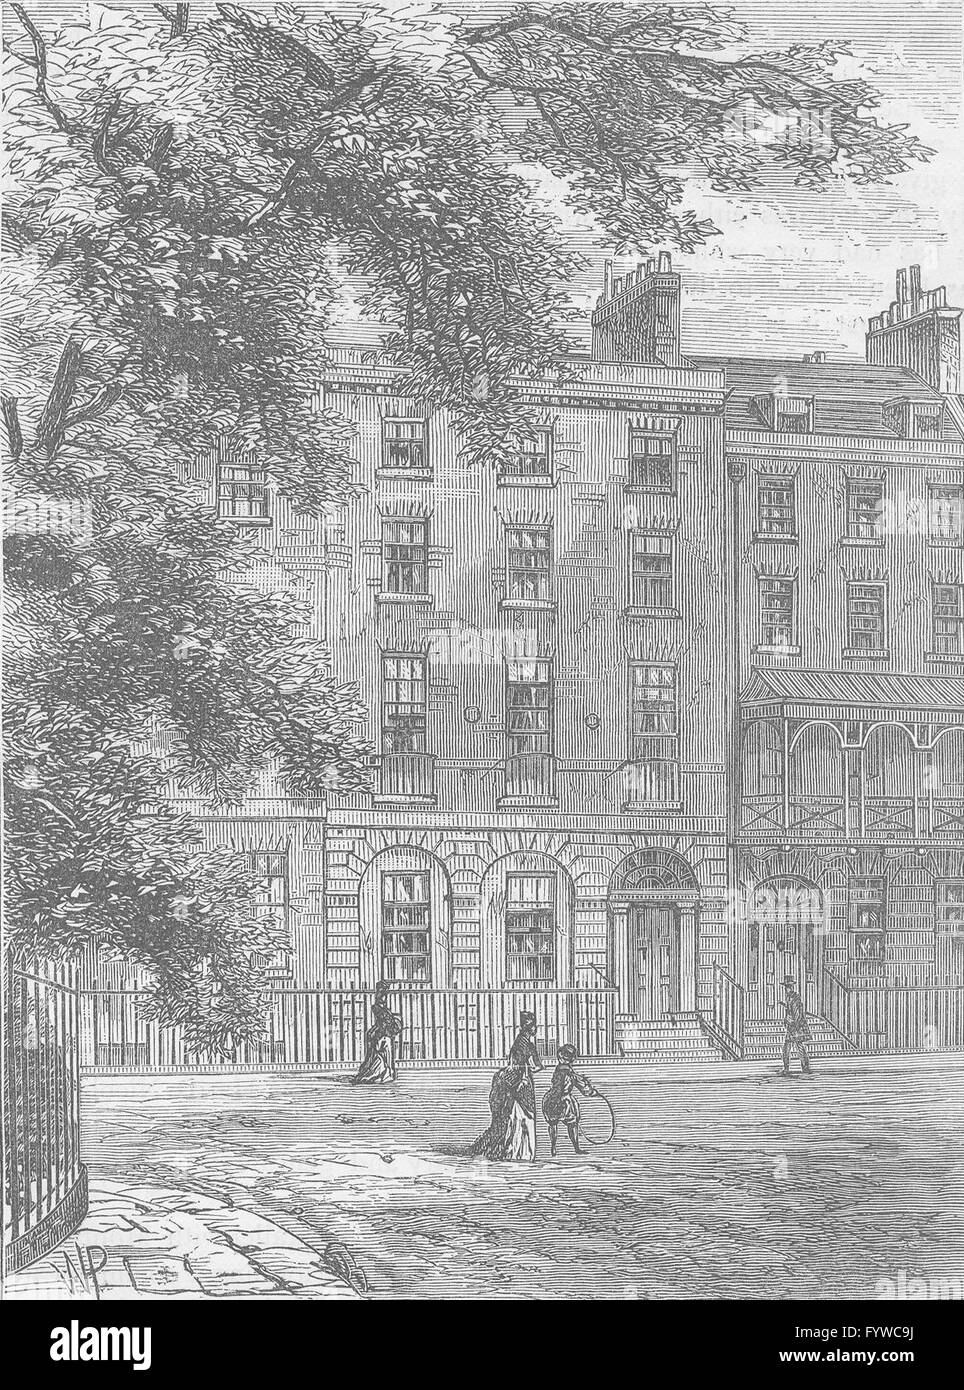 BLOOMSBURY: Sir Thomas Lawrence's House, Russell Square. Londra, stampa c1880 Foto Stock